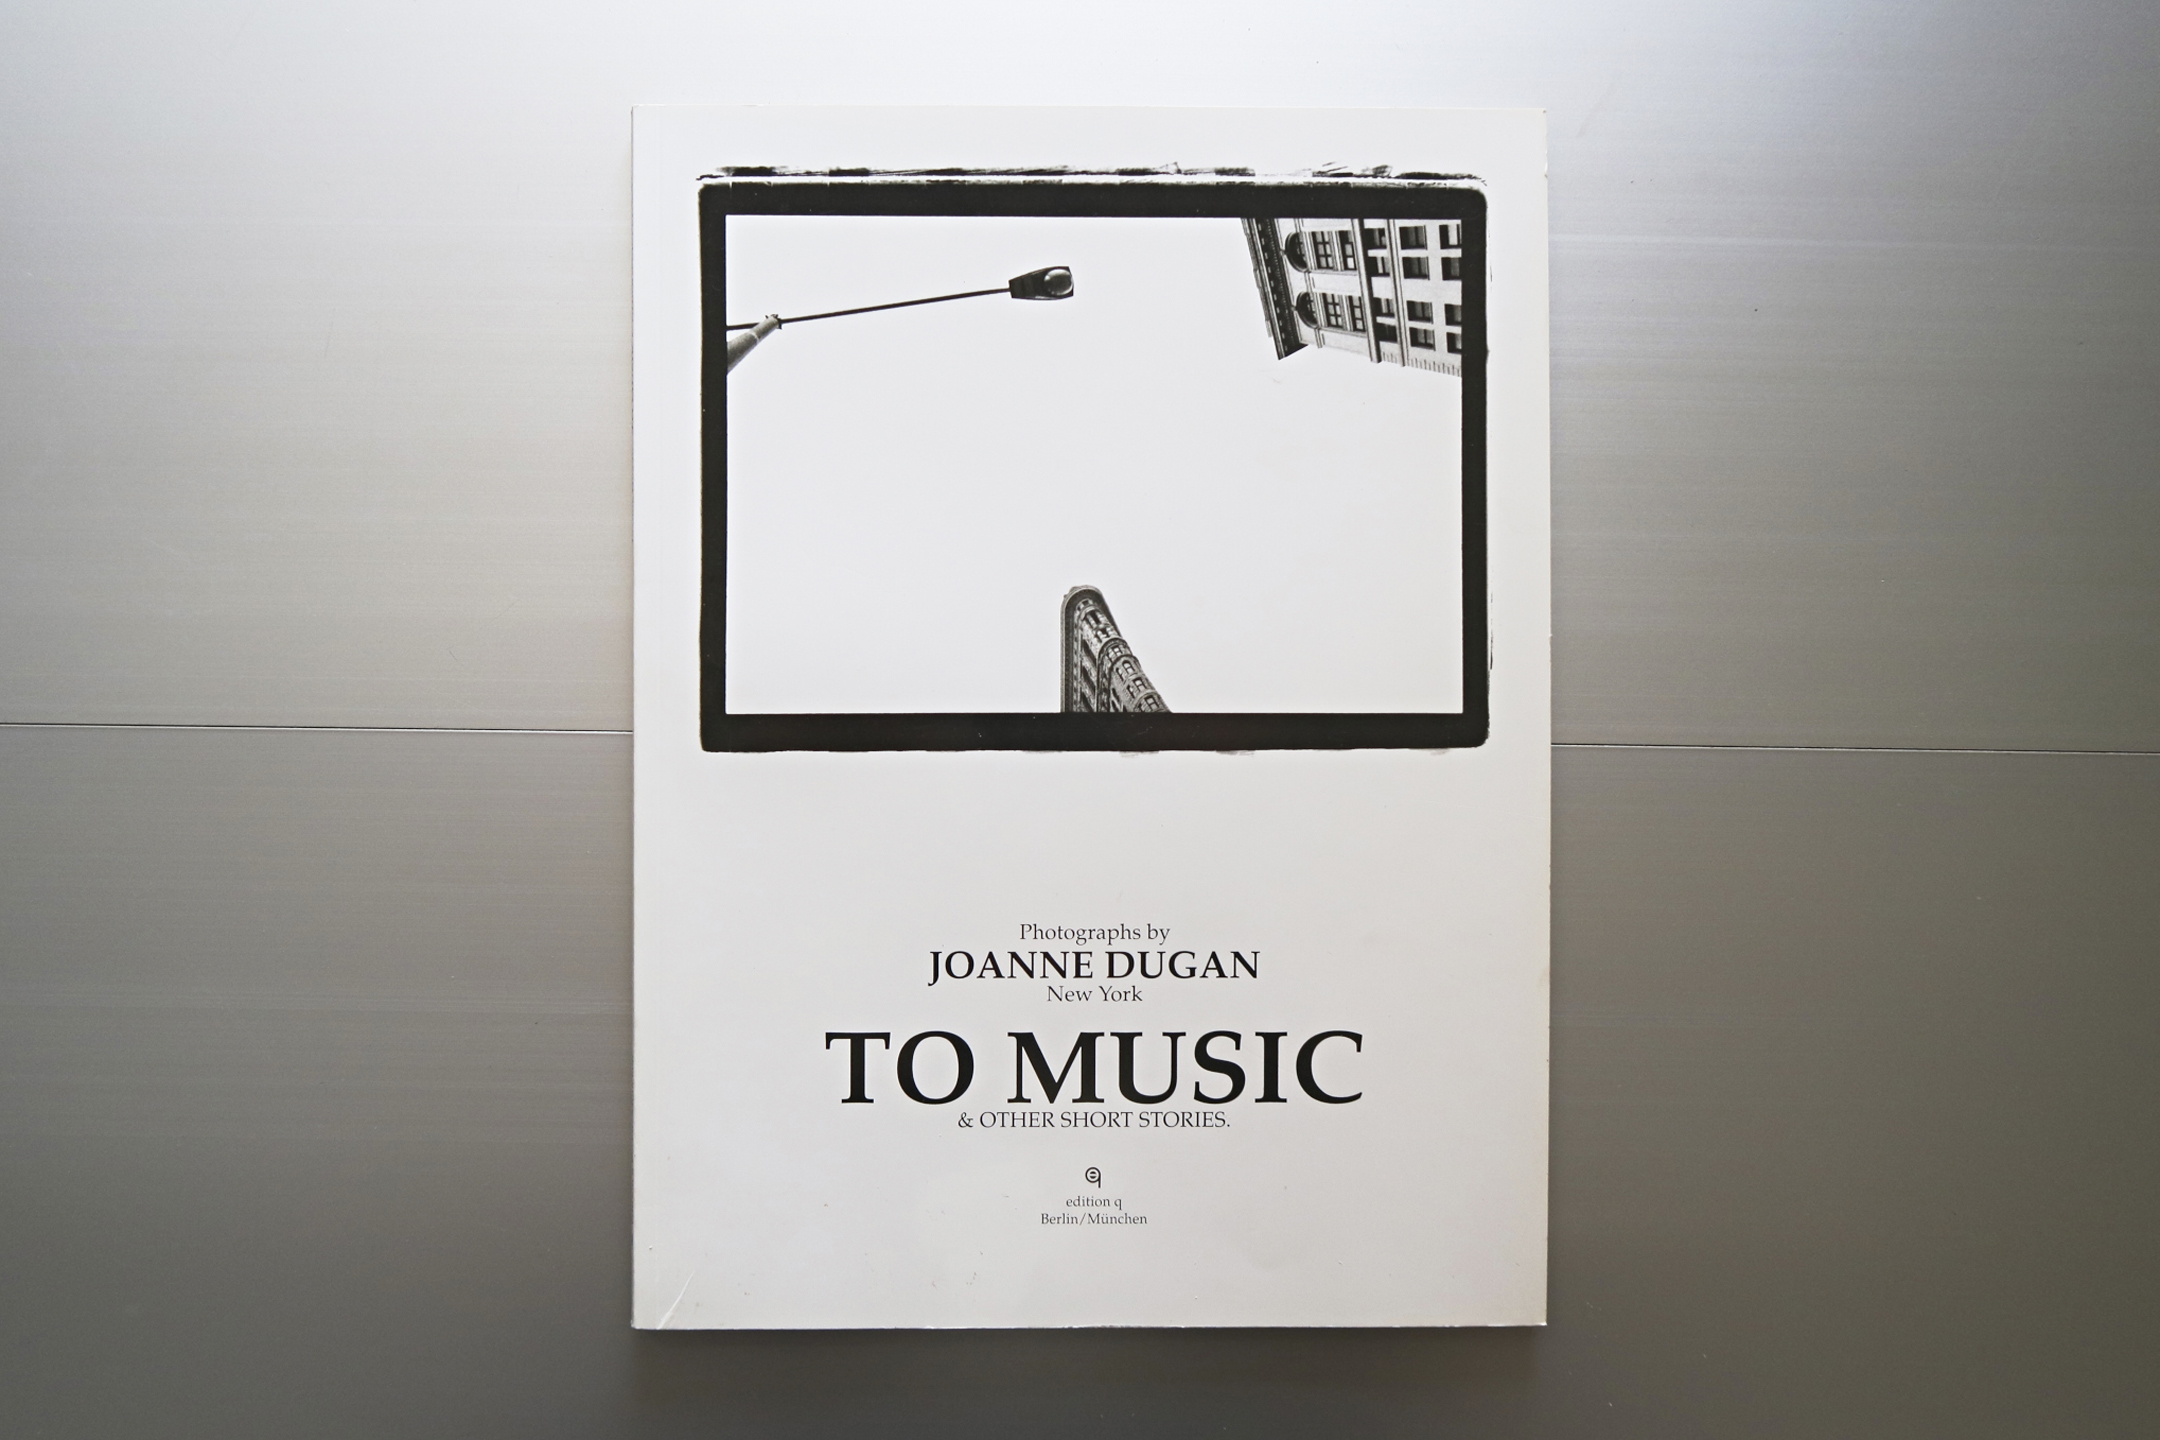  Photography and text by Joanne Dugan  Softcover book published by Ed. q, Berlin, Germany 